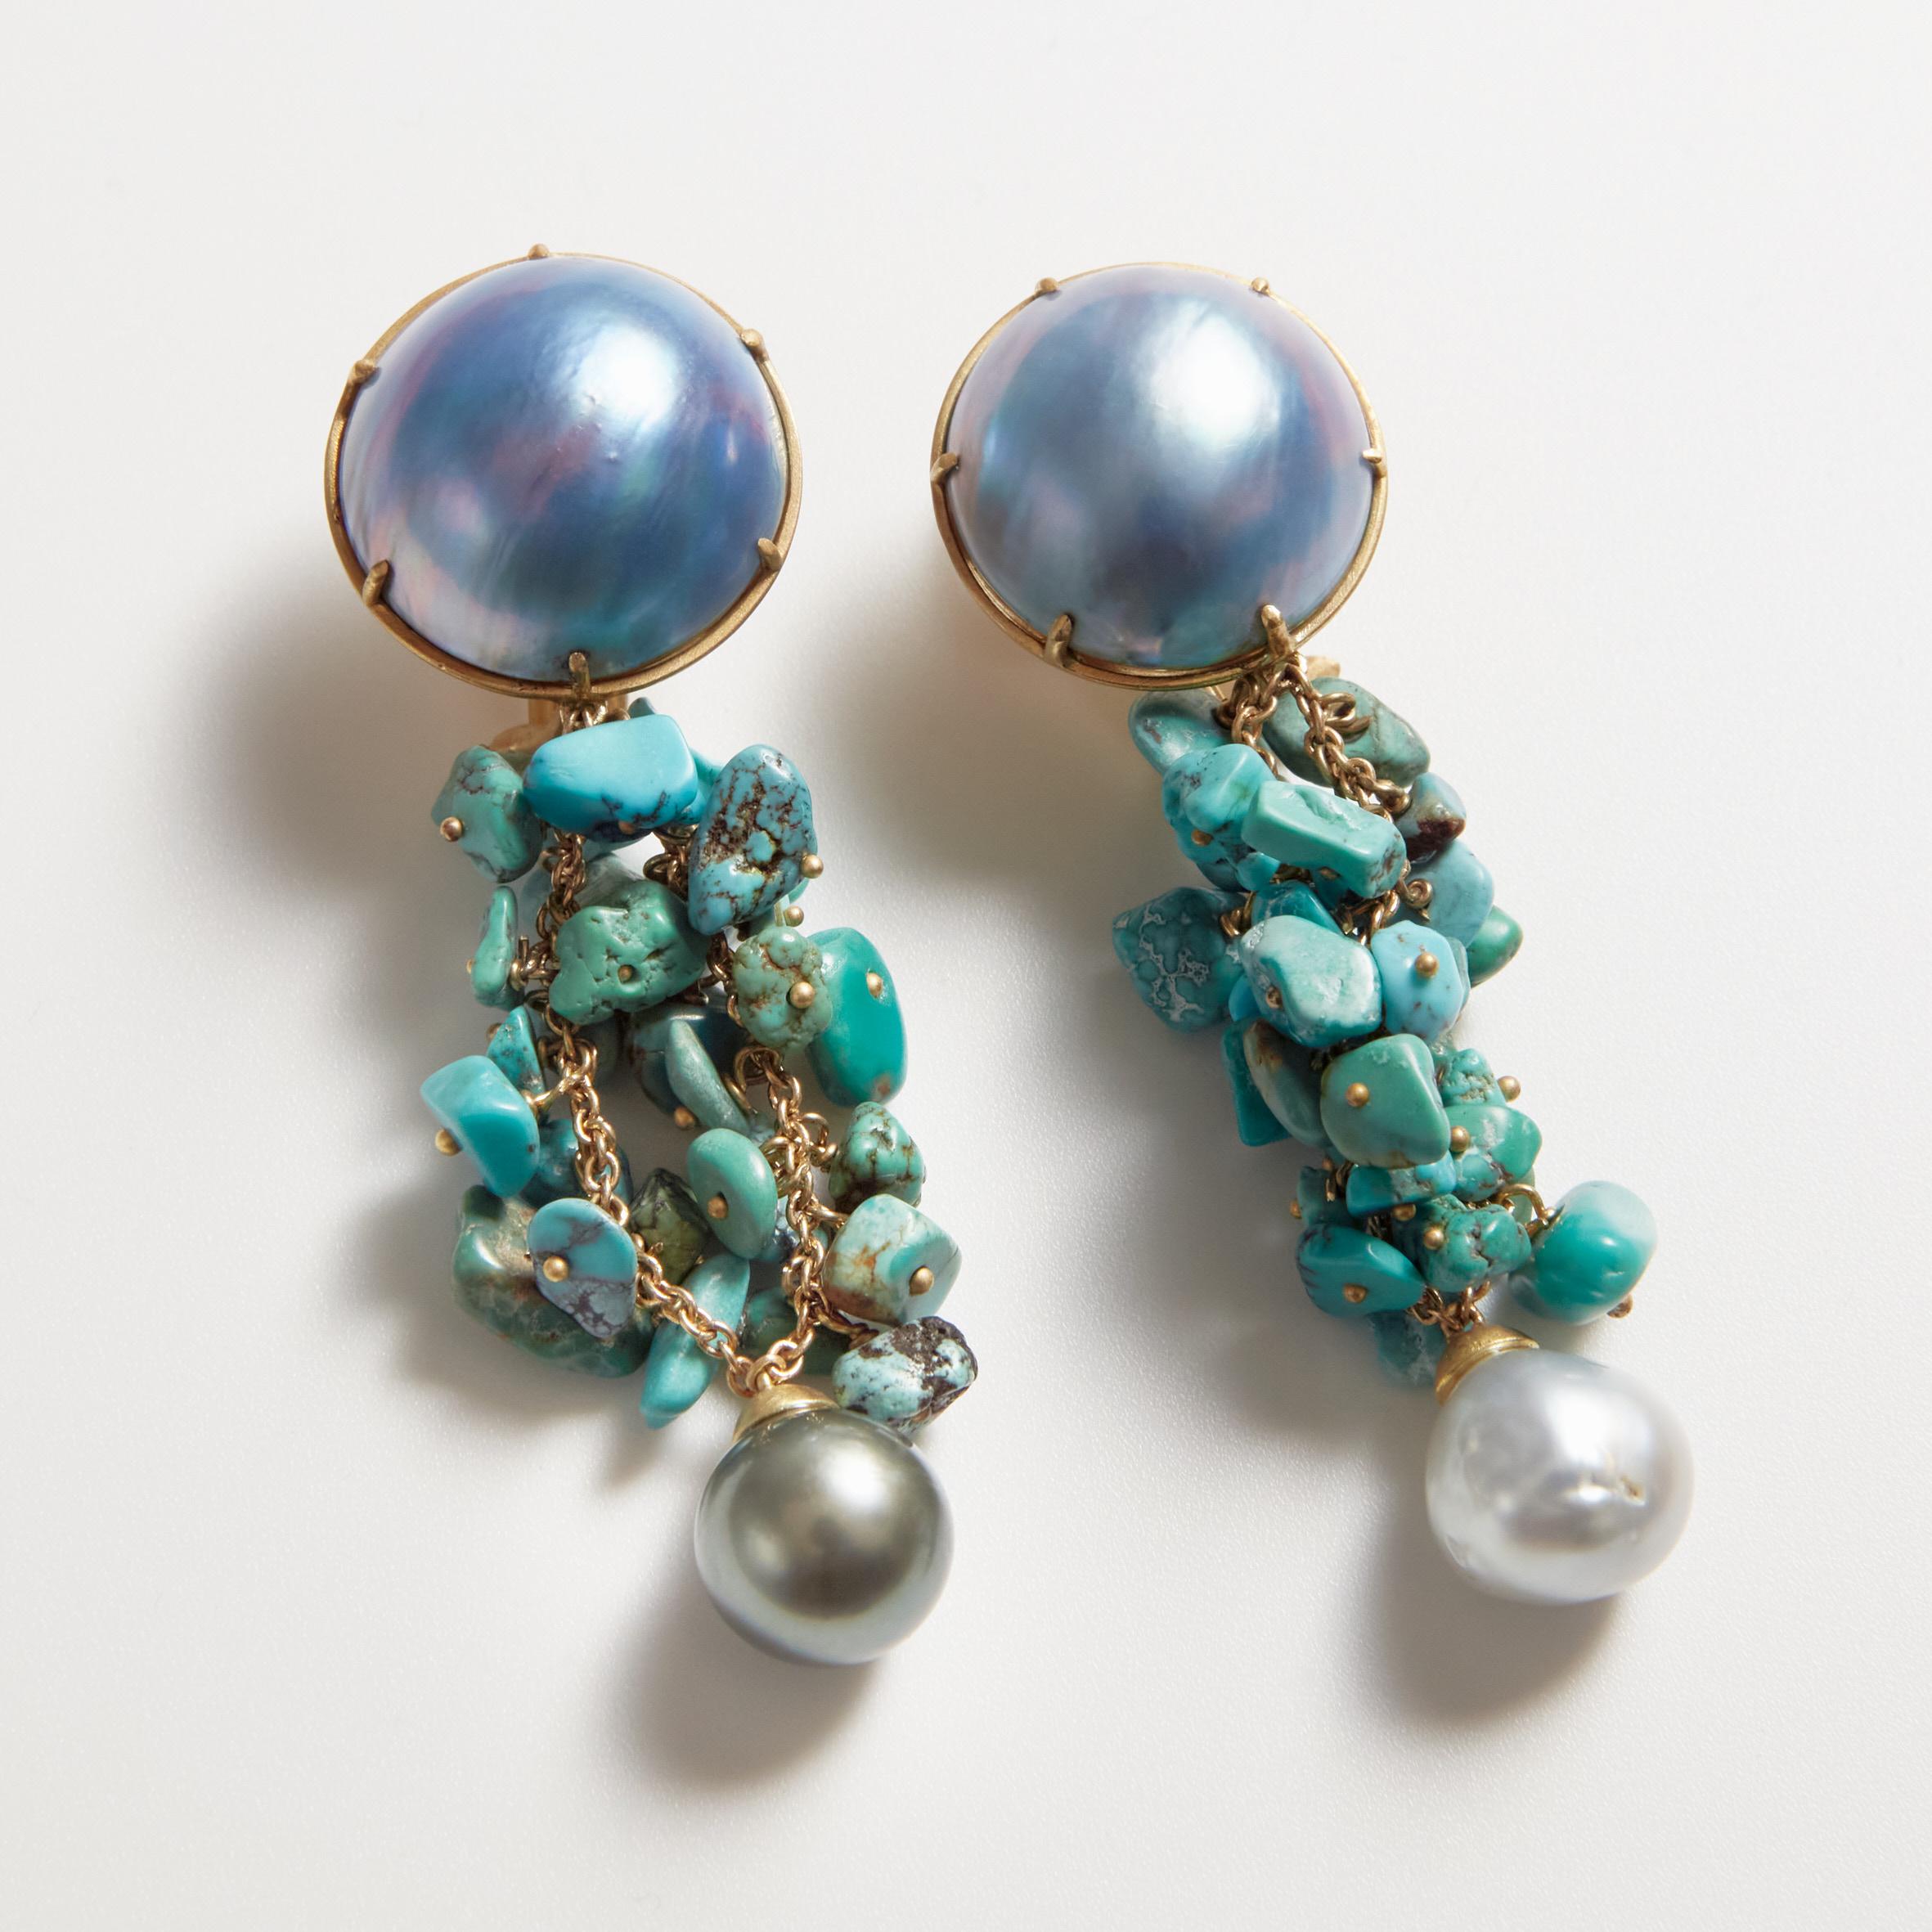 Little tourquoise stone composes this pair of earrings with a magnificent grey mabé natural pearl 18k gold and it's finioshed with a natural grey pearl.
Lenght 6. cm .
All Giulia Colussi jewelry is new and has never been previously owned or worn.